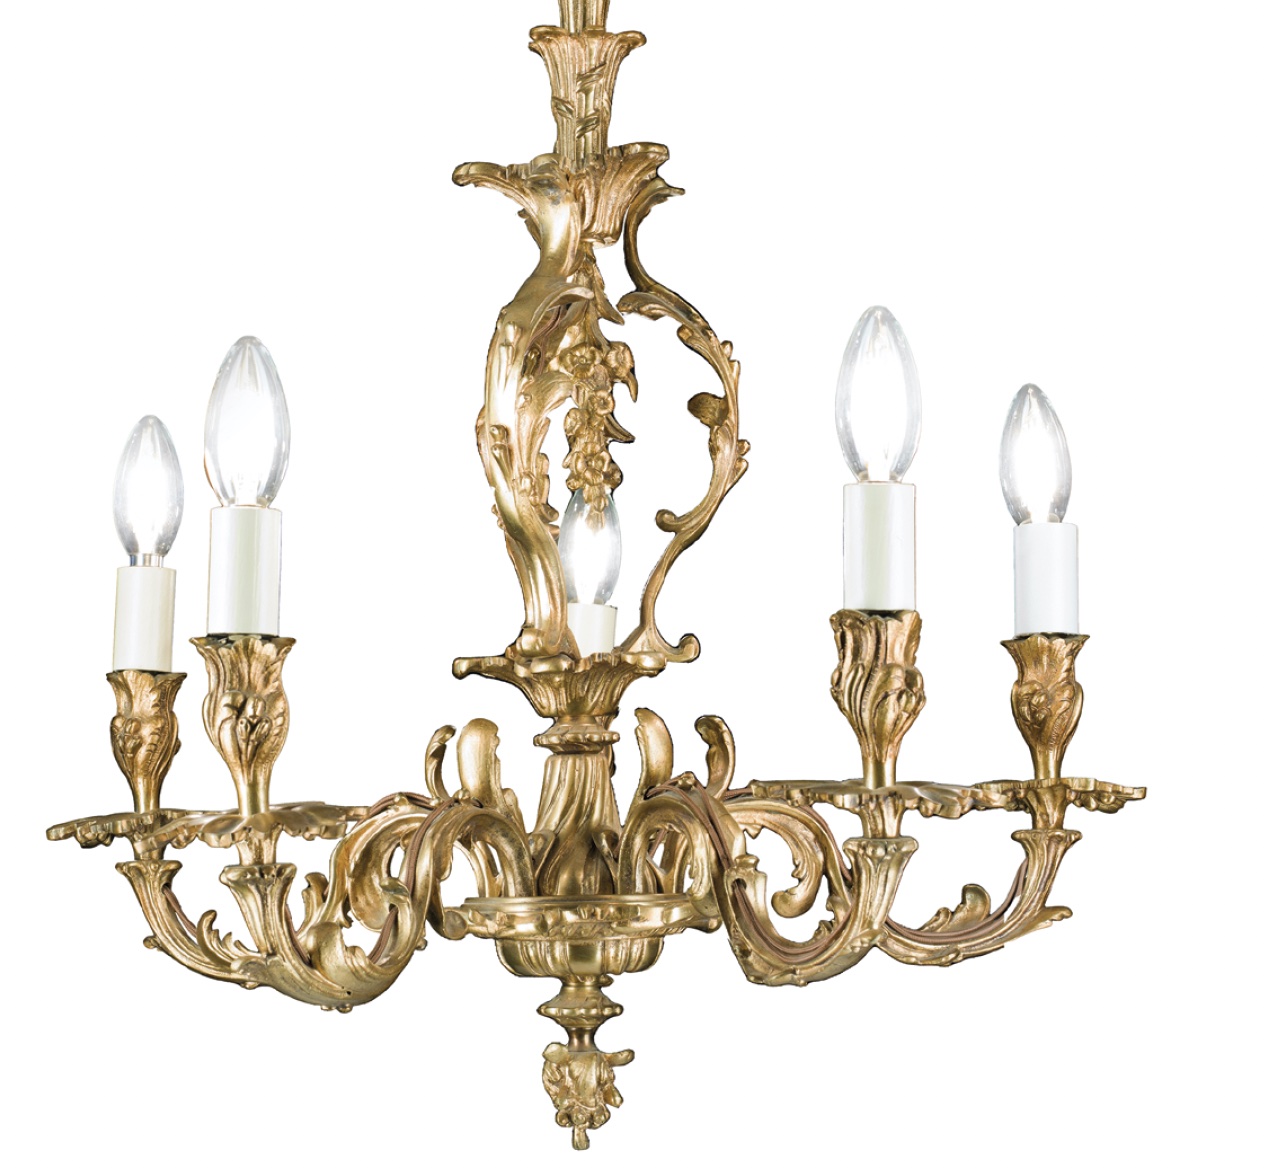 A gilt brass rococo five-branch chandelier modelled with twisting acanthus leaves and flowers, French, c.1890